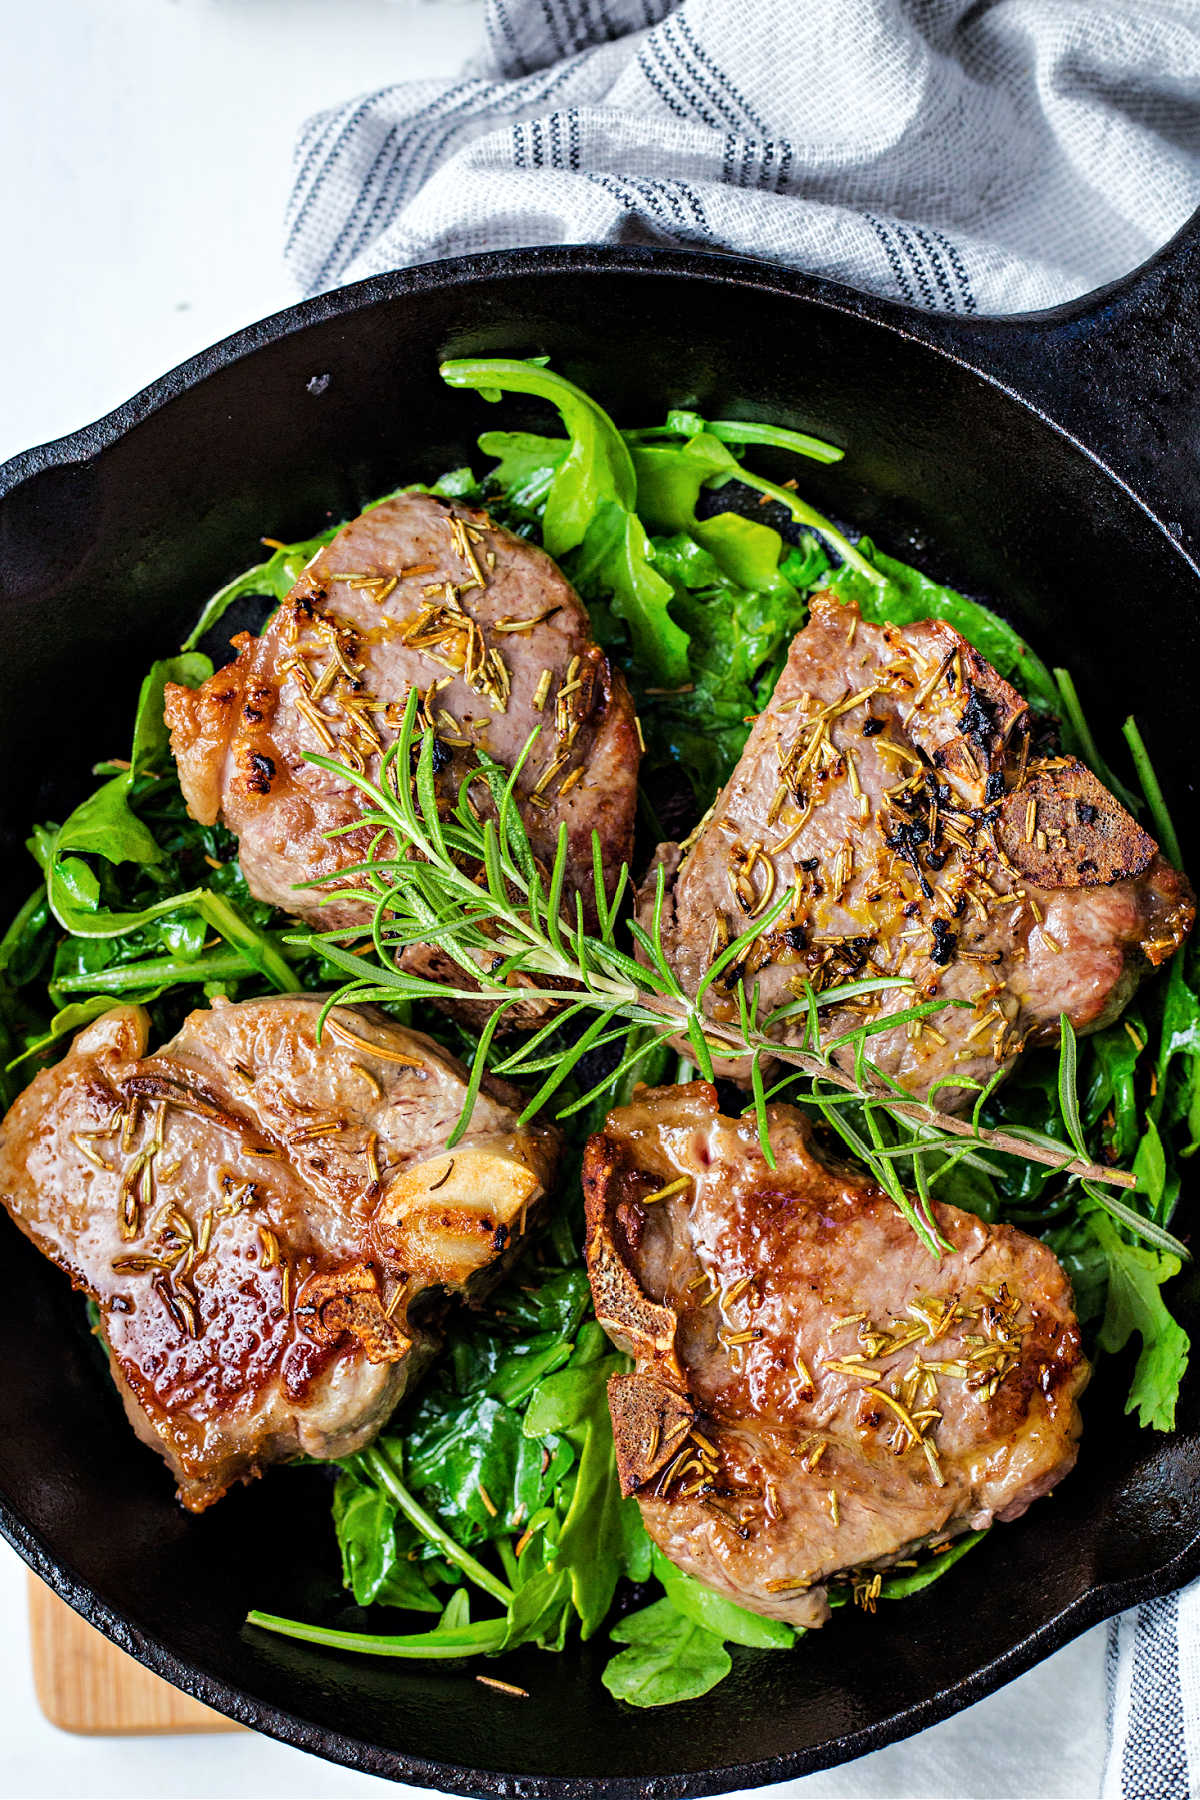 broiled lamb chops on a bed of arugula in a cast iron pan and garnished with a sprig of rosemary.